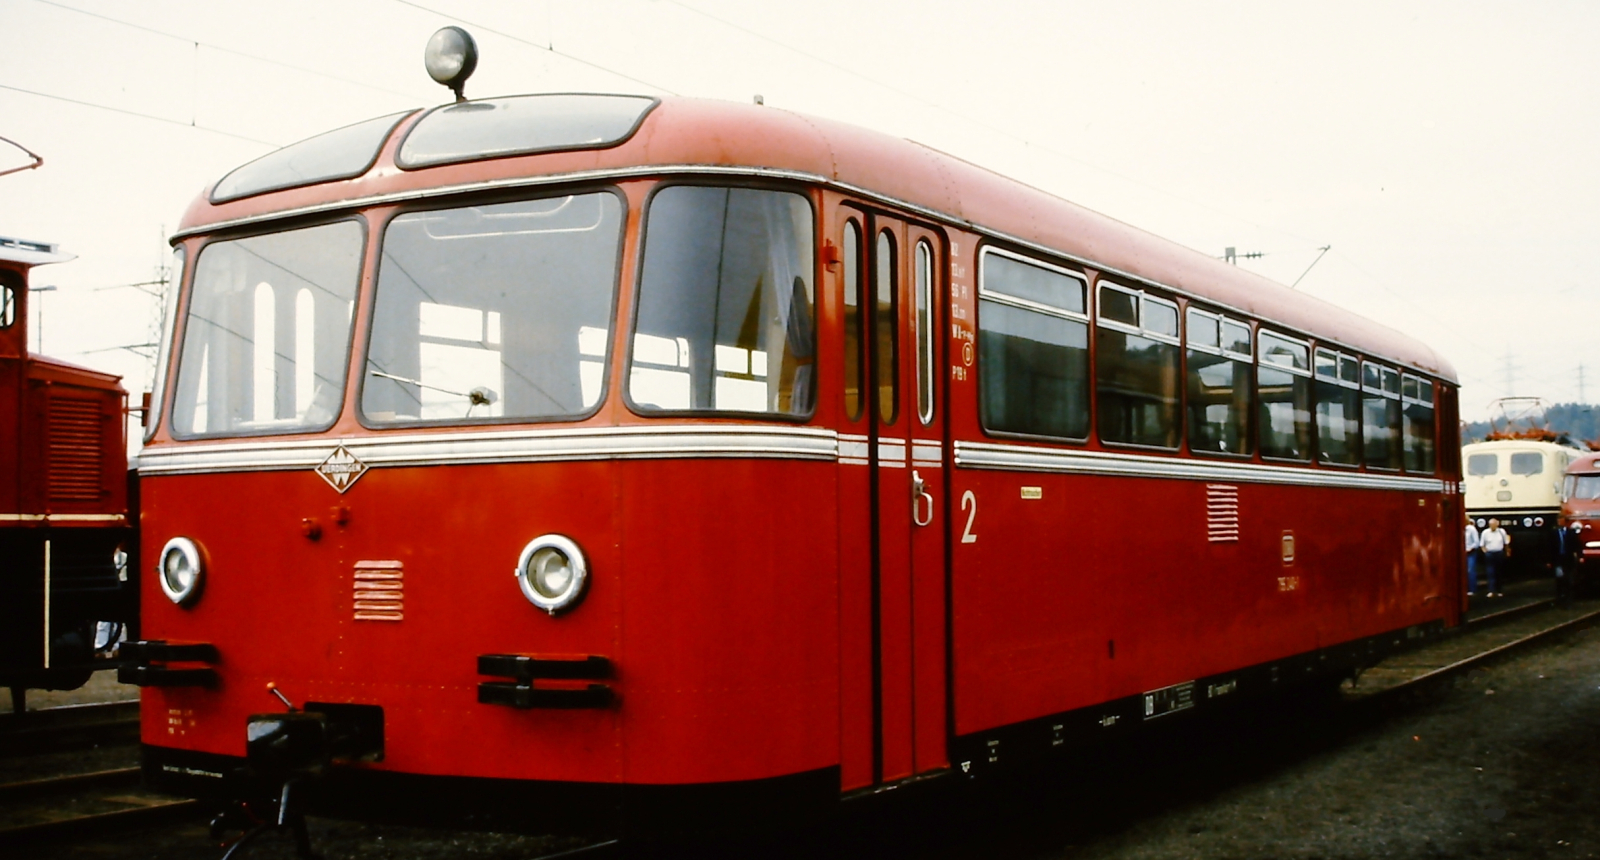 VT 95 240 at the “150 Years of German Railways” vehicle show in 1985 in Bochum-Dahlhausen